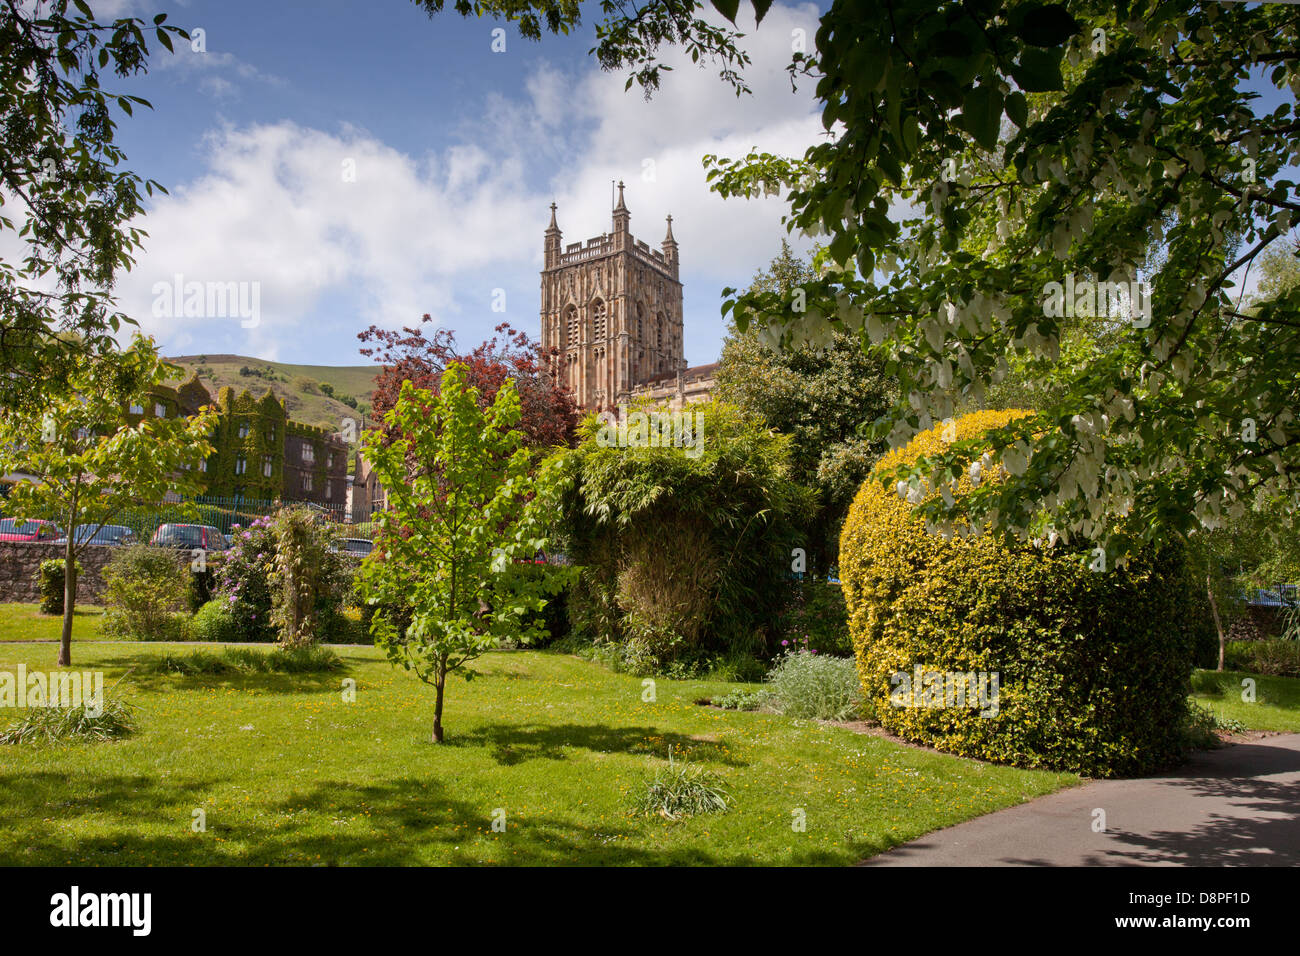 View of the tower, the Priory, Great Malvern, as seen from surrounding gardens. Stock Photo